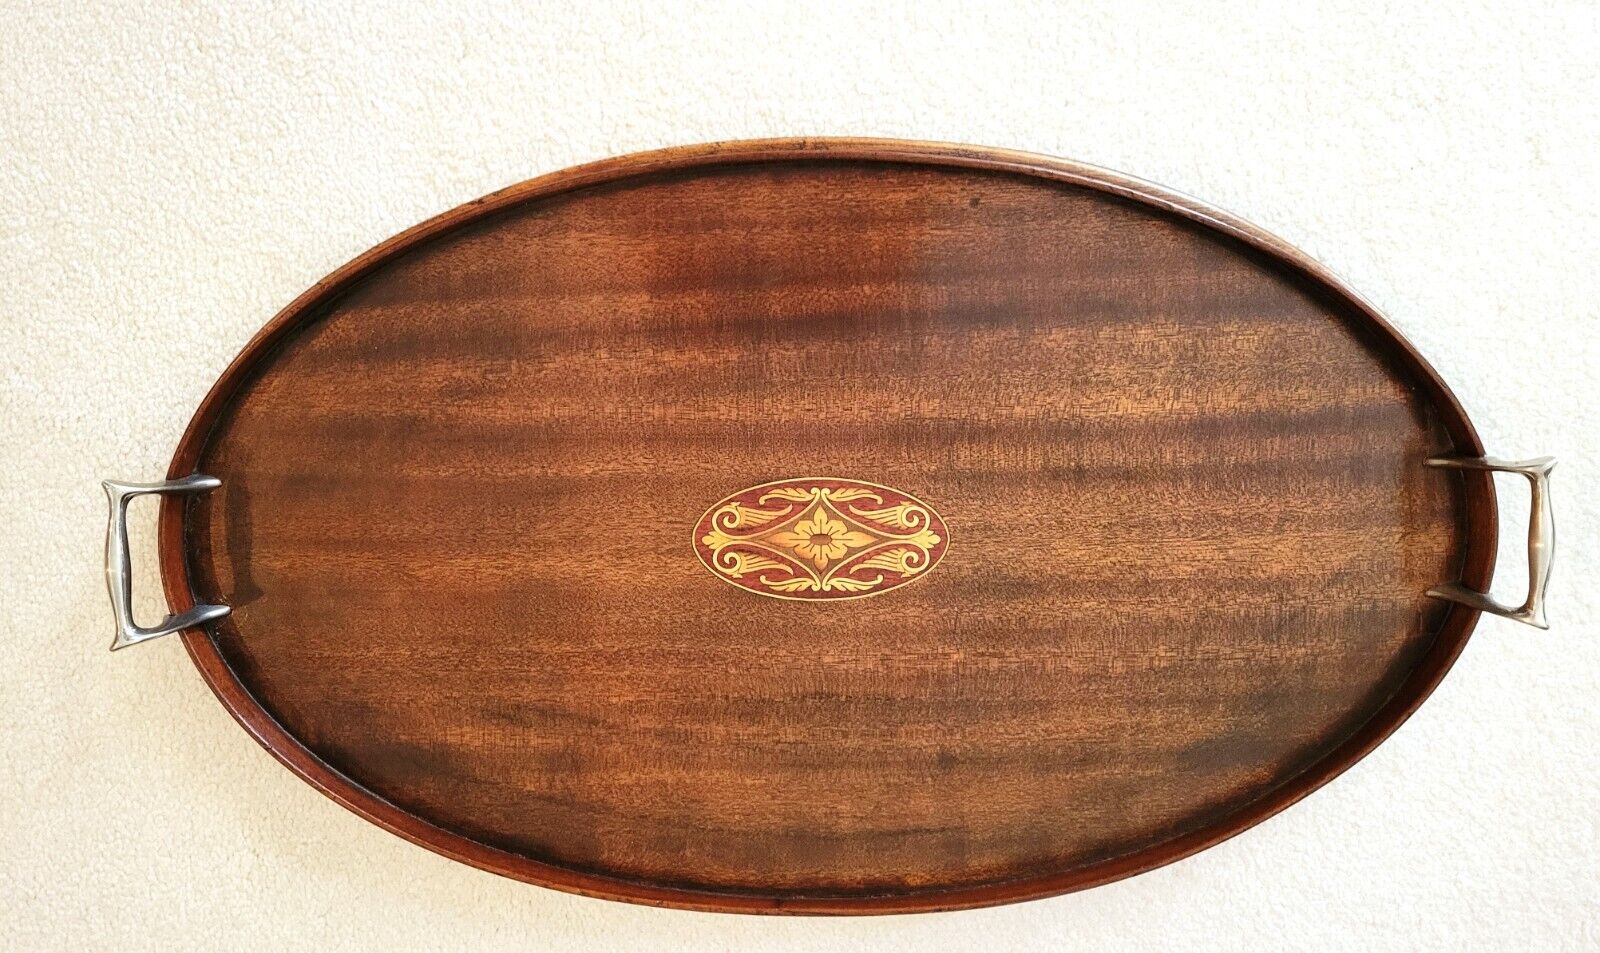 Quality Antique Mahogany Edwardian Inlaid Oval Gallery Tray with Nickel Handles